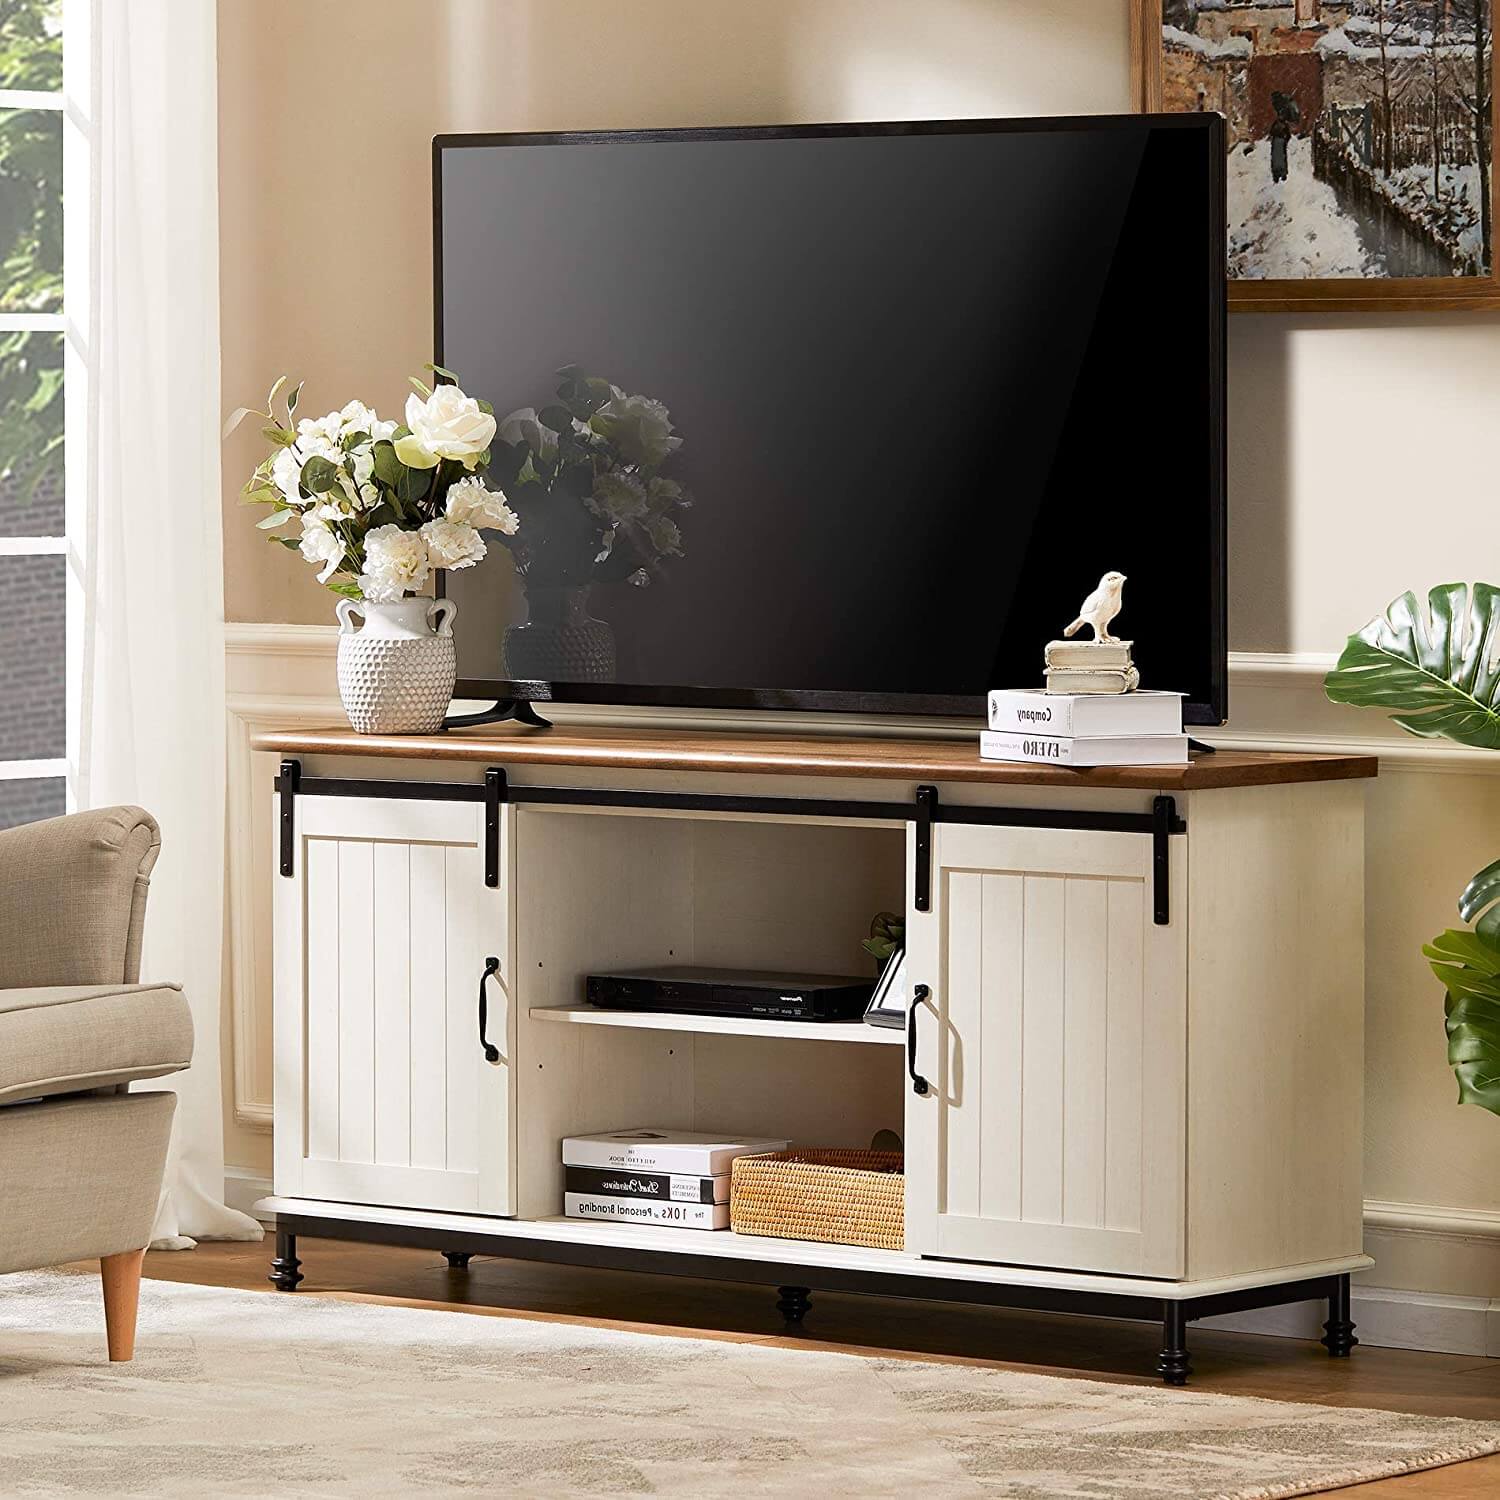 WAMPAT 58” Farmhouse TV Stand for TVs Up to 65 Inch, White